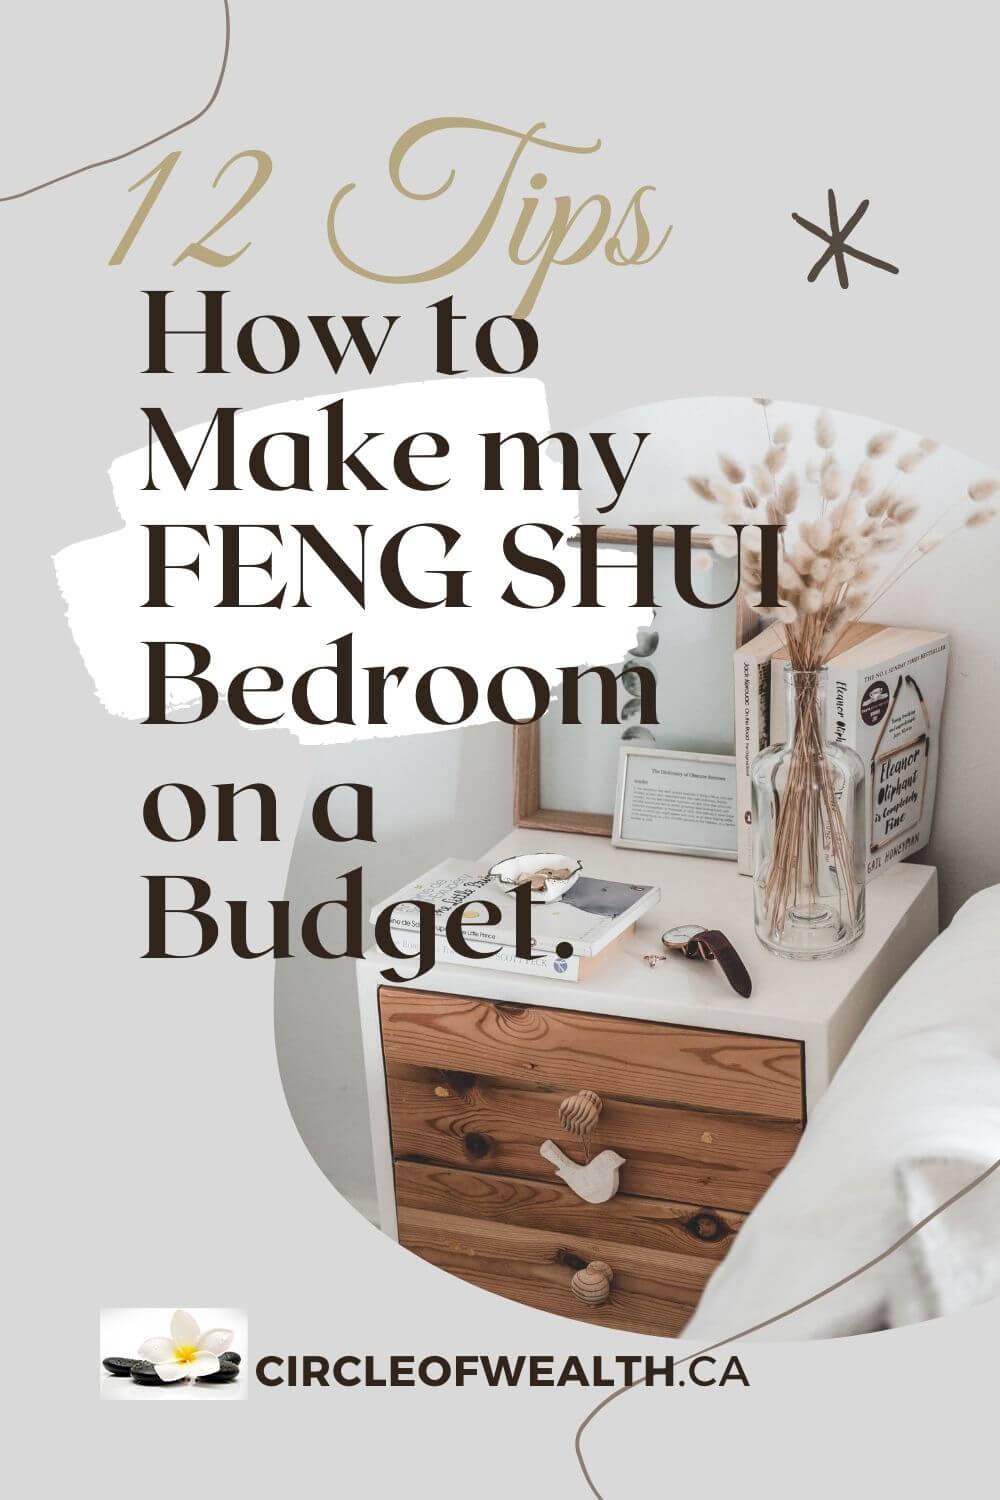 12 Tips How to Make My Feng Shui Bedroom on a Budget.